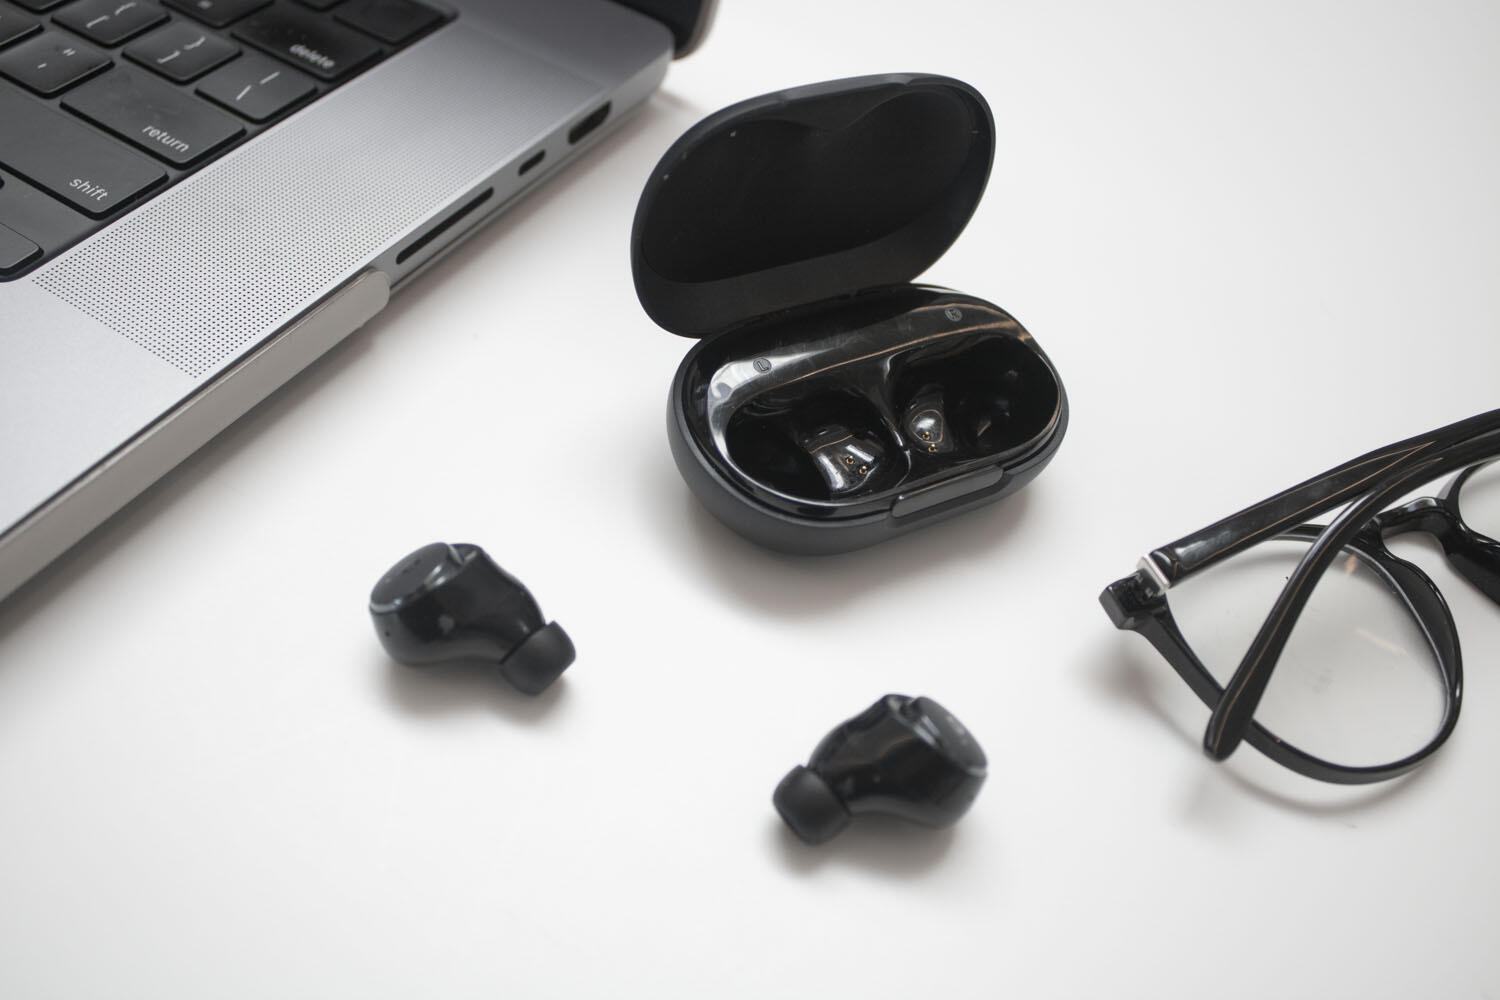 These $99 Anker earbuds last longer than your AirPods | ZDNET